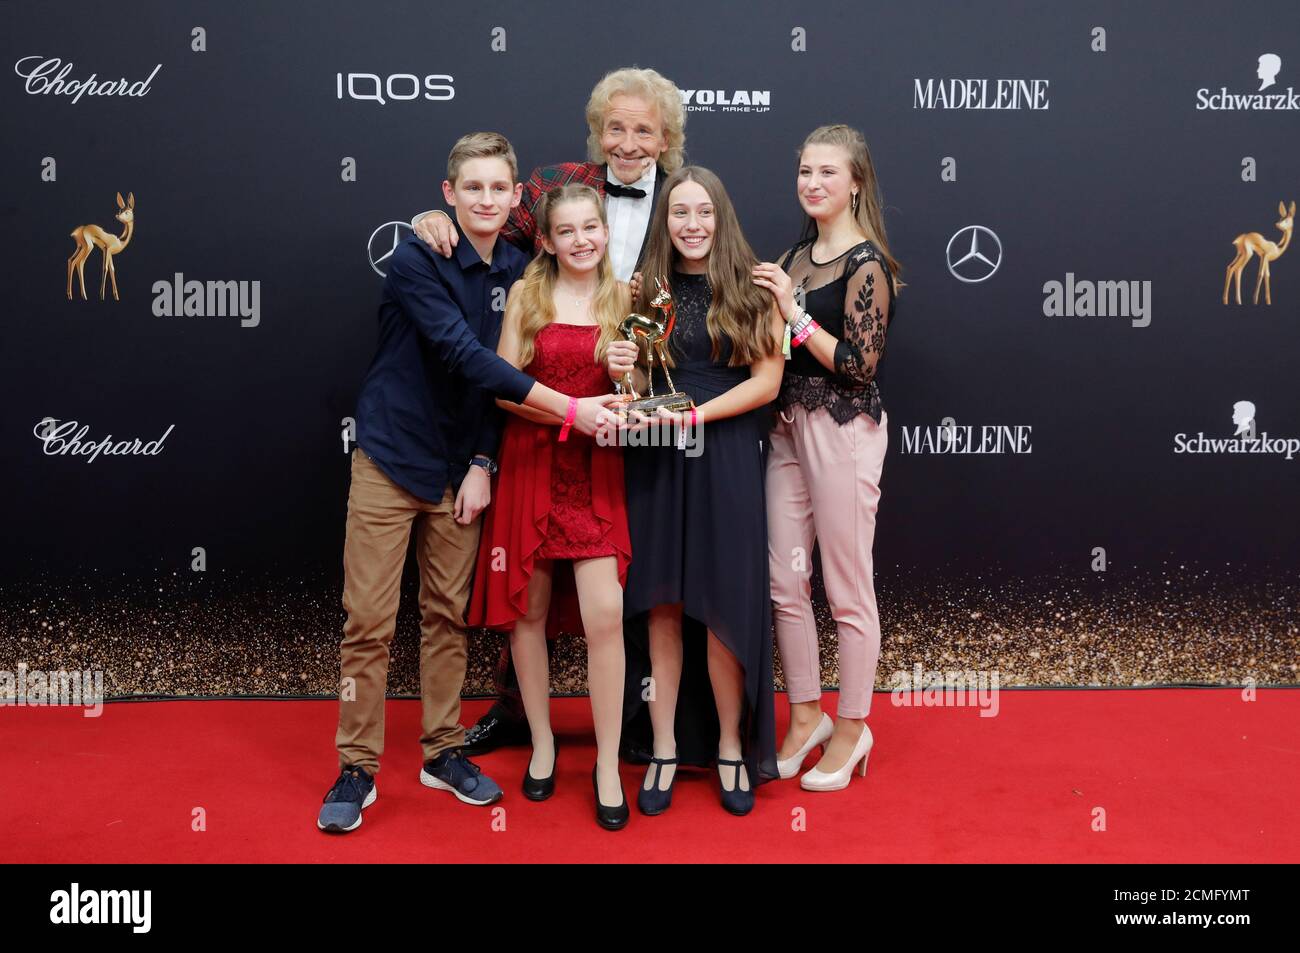 German TV presenter Thomas Gottschalk poses with winners of the 'Our Future' award Magdalena Kist, Jule Albrecht, Helena Back and Claudio Waldele at the Bambi 2019 Awards ceremony in Baden-Baden, Germany, November 21, 2019. REUTERS/Arnd Wiegmann Stock Photo